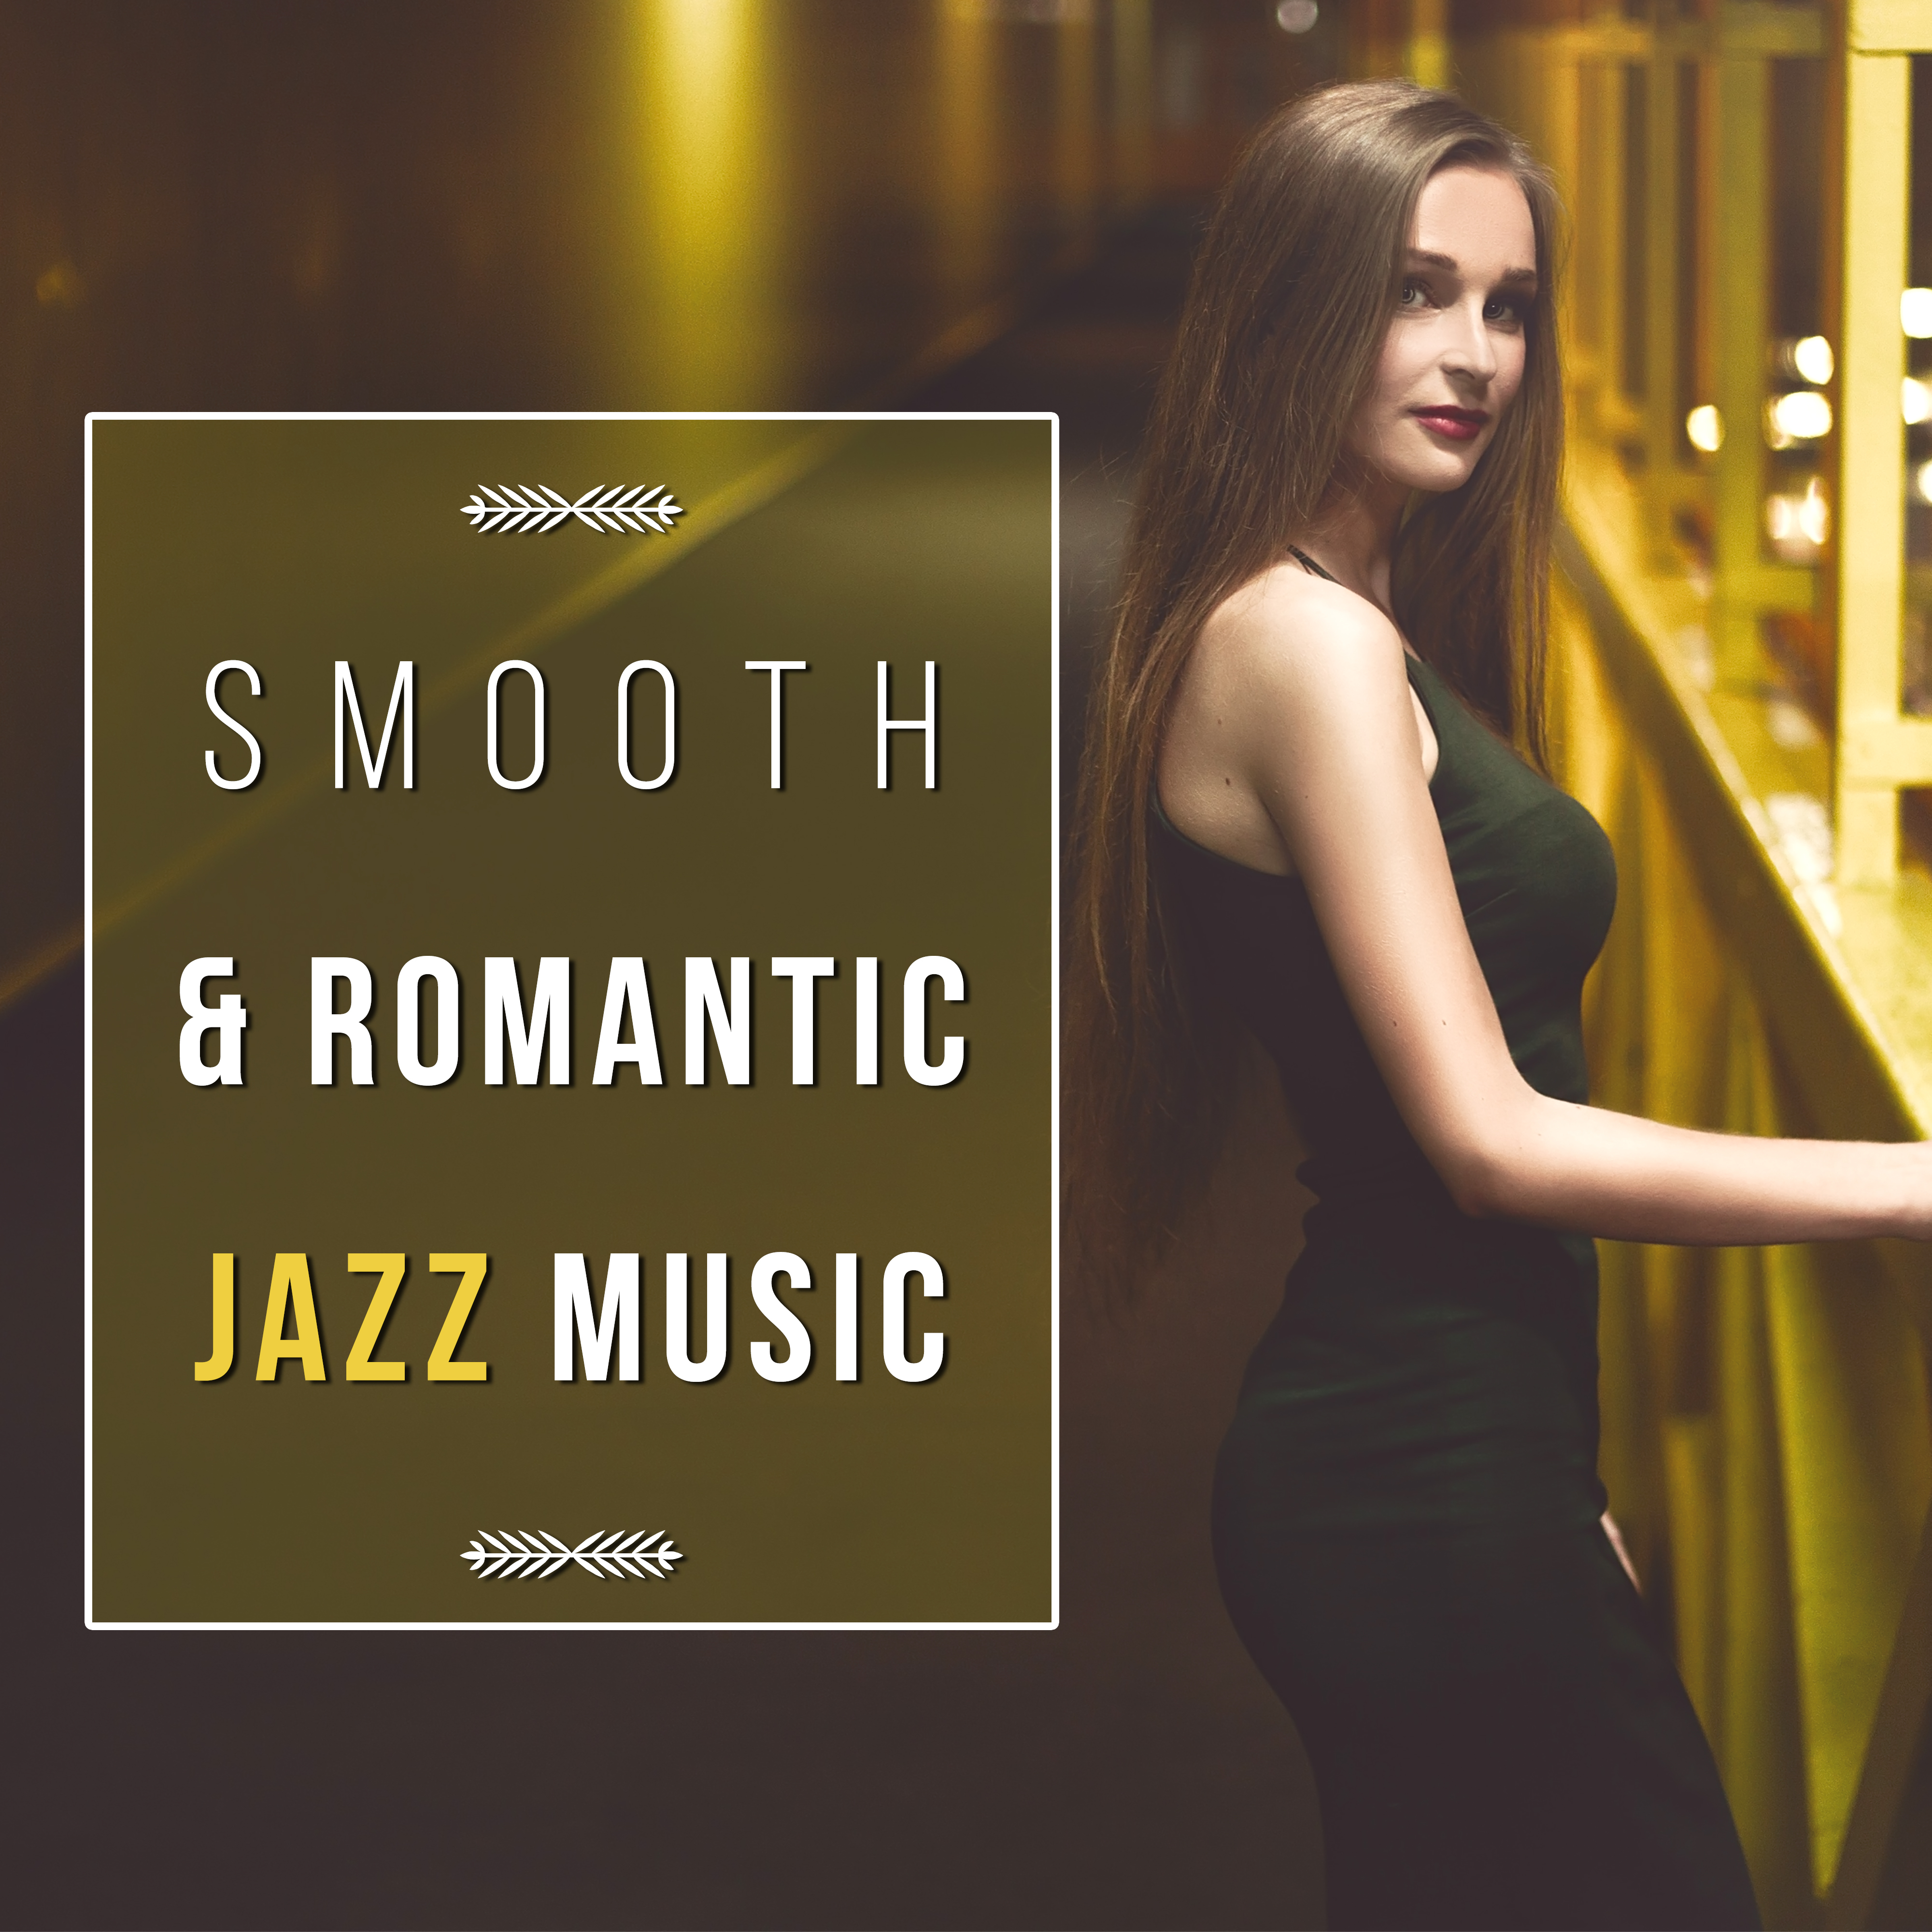 Smooth  Romantic Jazz Music  Relaxing Sounds for Lovers, Hot Massage, Mellow Jazz, Erotic Sounds